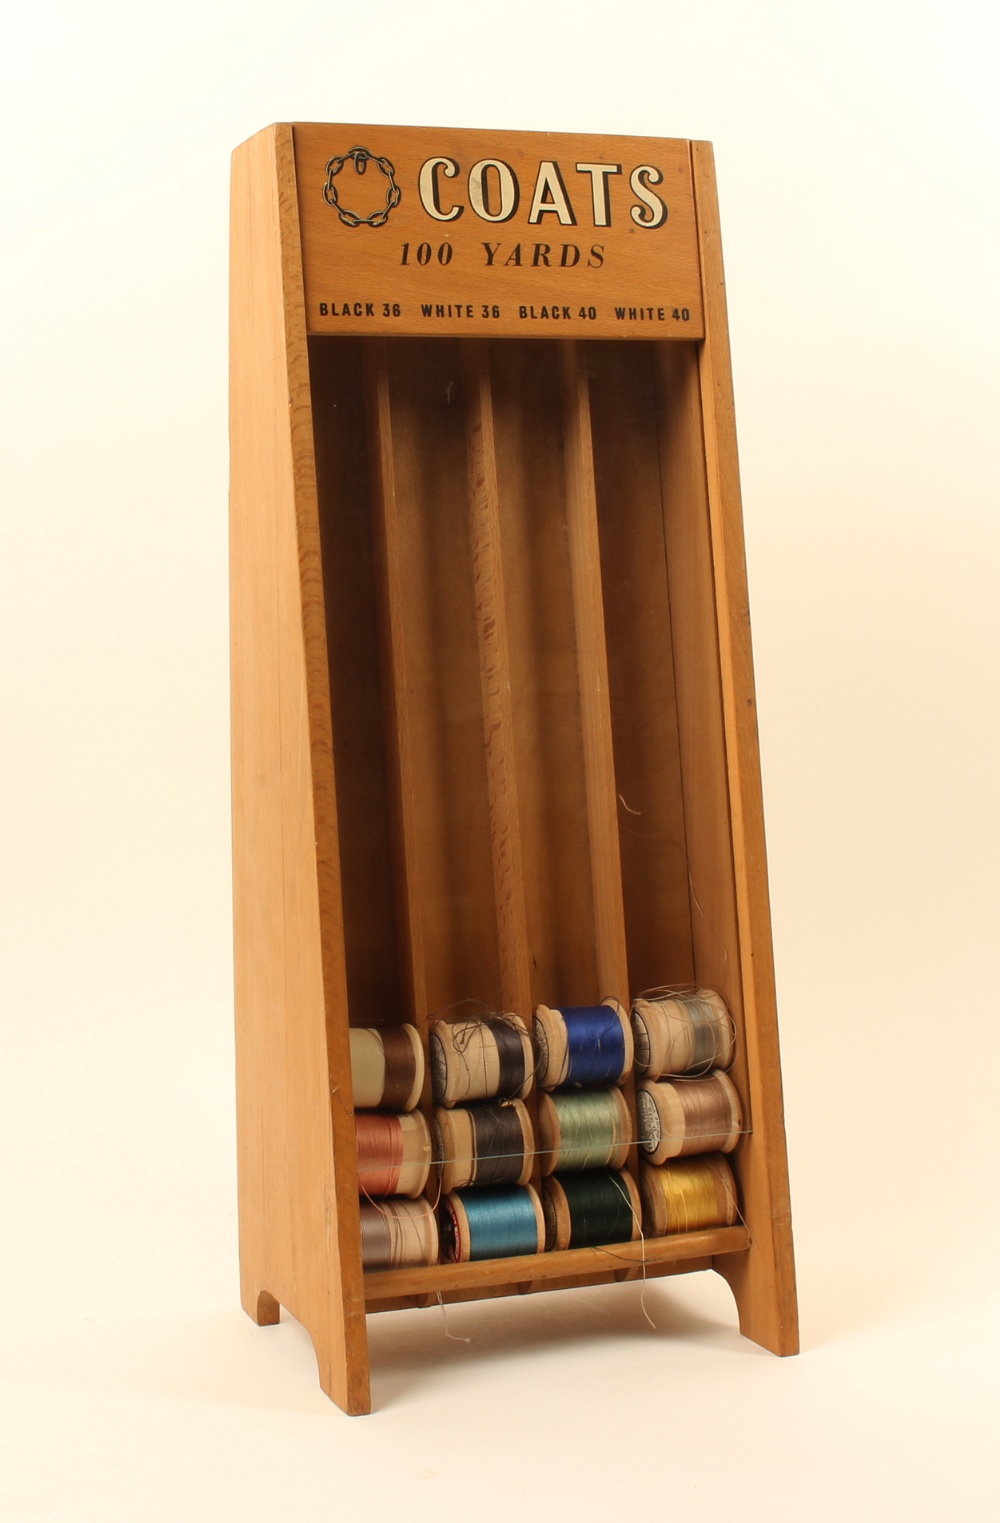 A Coats cotton reel counter display stand, with four reel slots below a panel inscribed "Coats 100